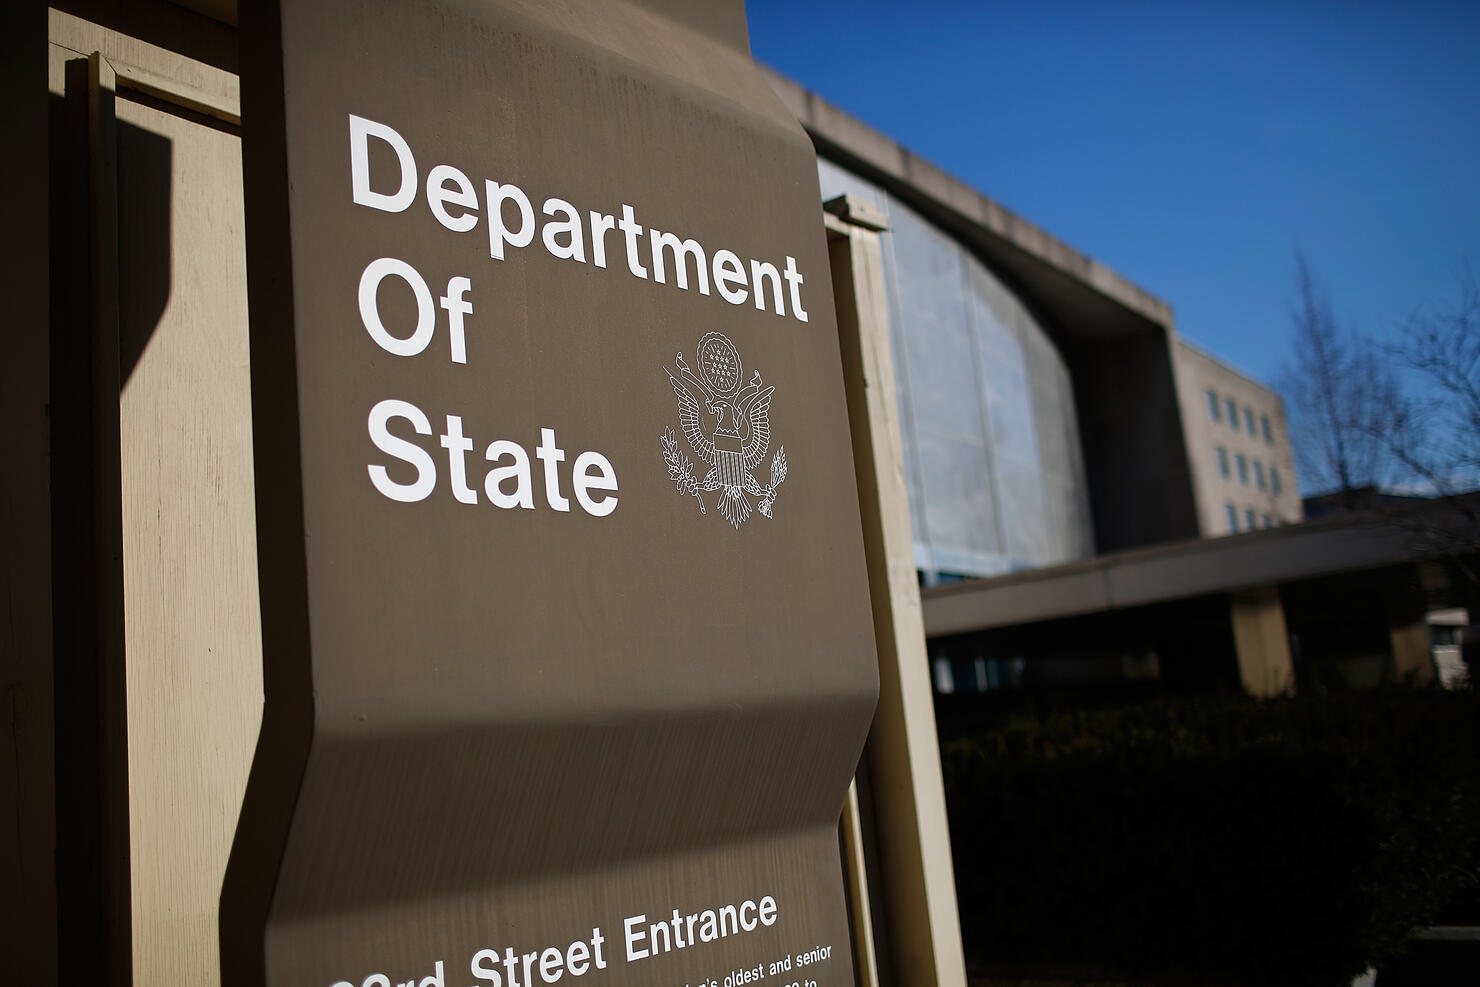 Senior State Department Management Officials Forced To Resign